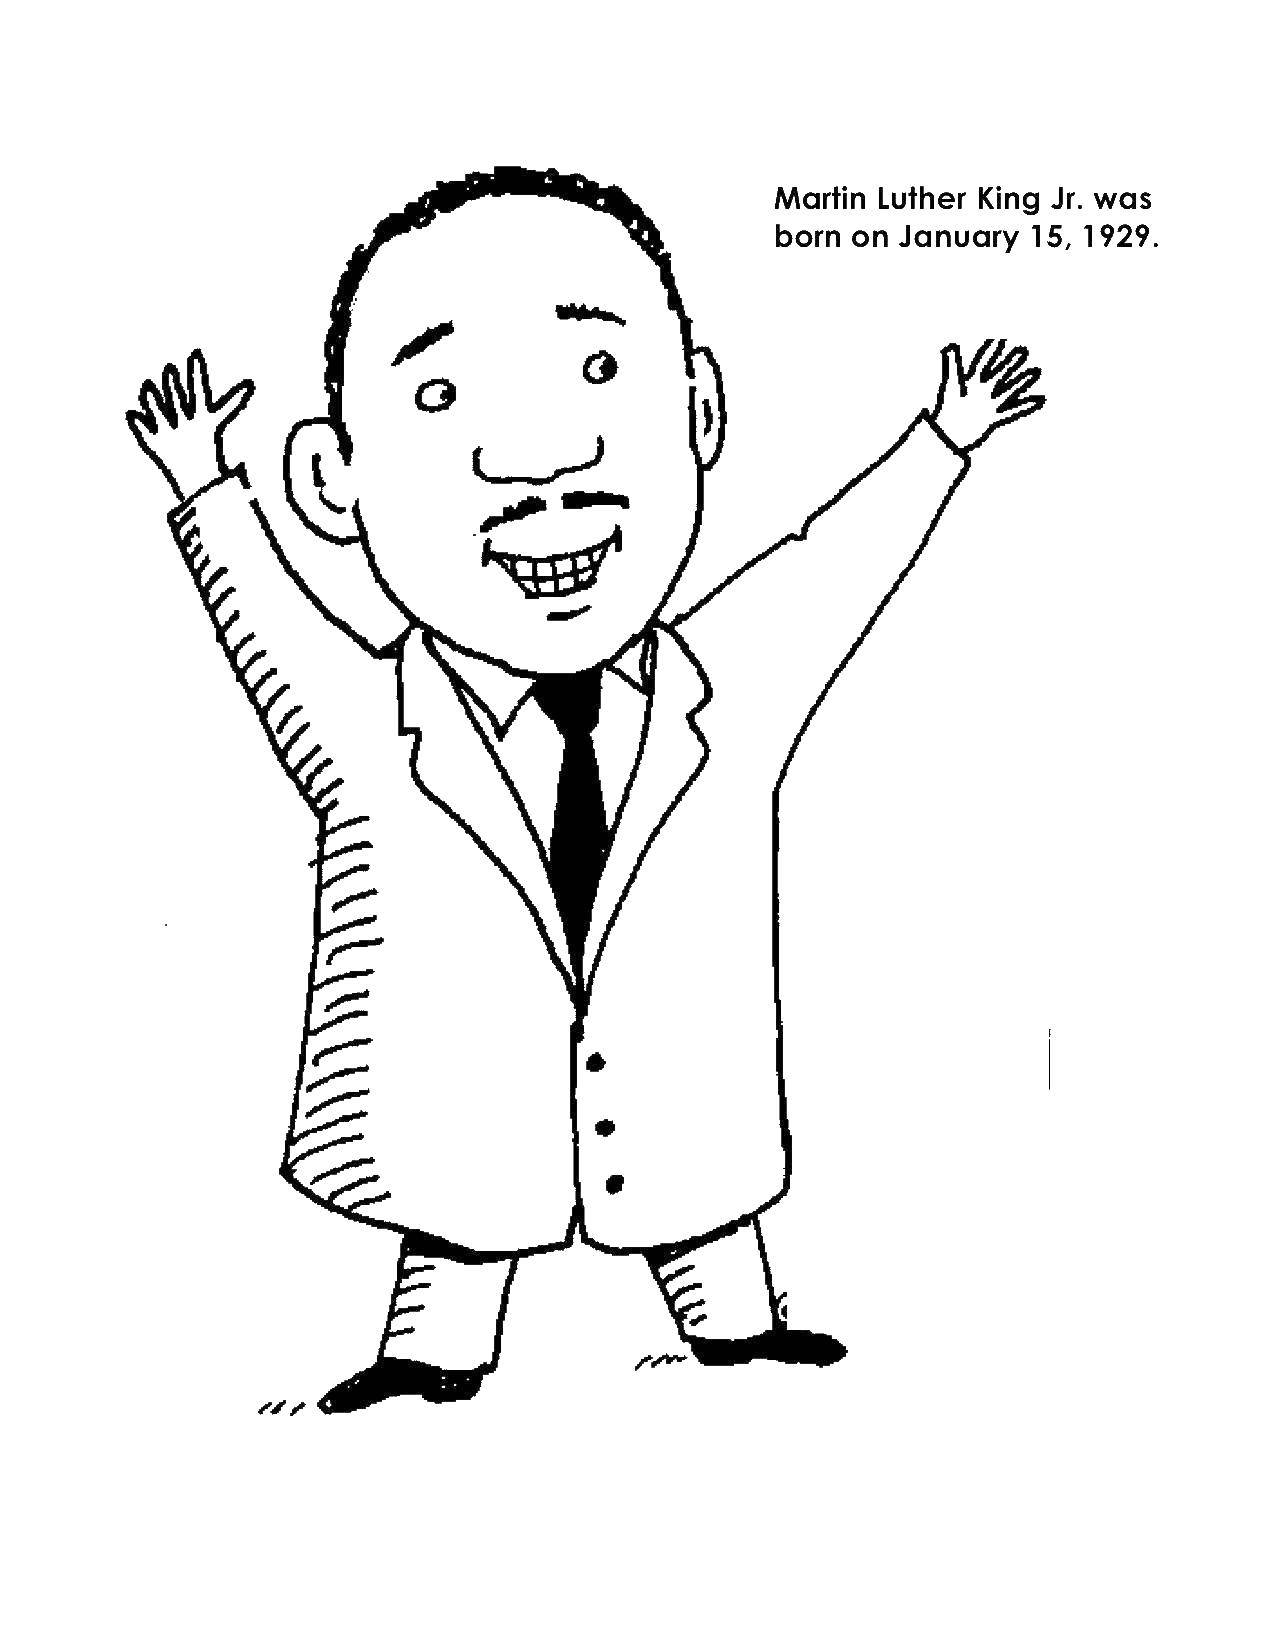 Coloring Martin Luther king, Jr.. Category coloring. Tags:  celebrity, the reformation, the Martin Luther king.